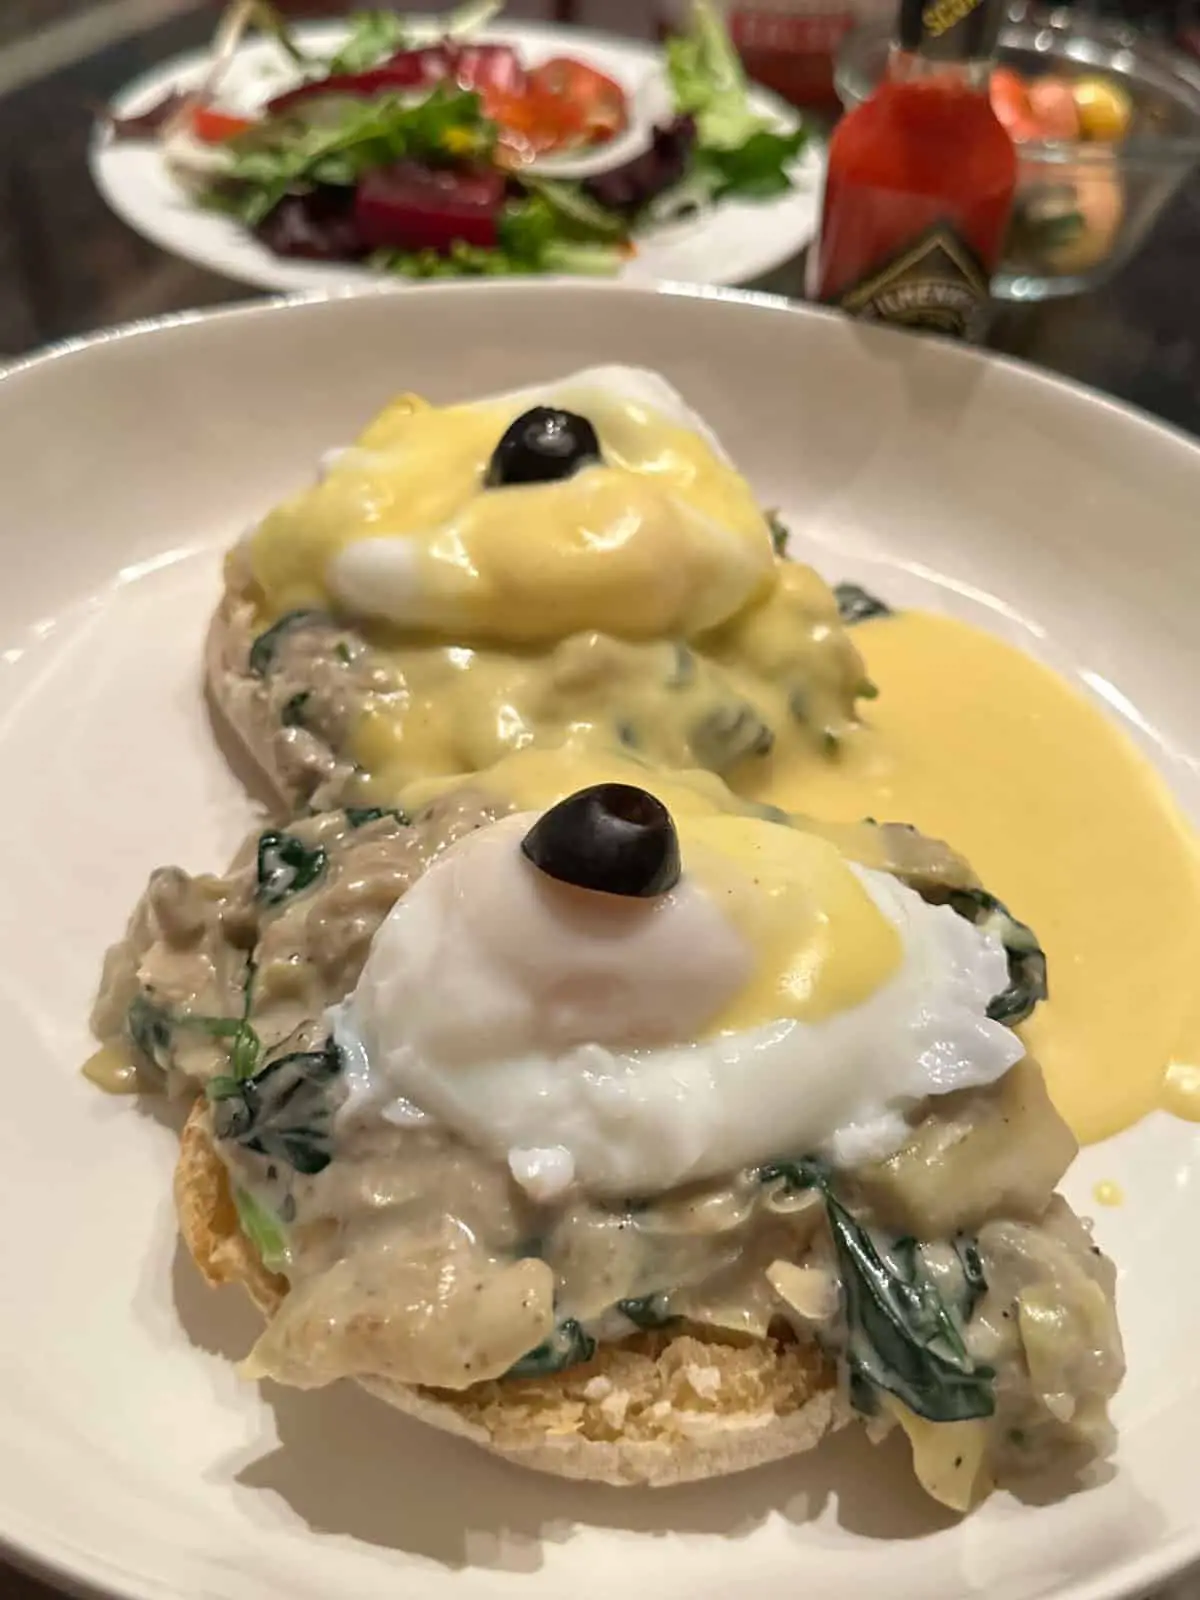 Poached eggs with hollandaise sauce and black olives atop creamed spinach and artichokes and an English muffin on a white dish with a salad, fruit, and bottle of Tabasco in the background.